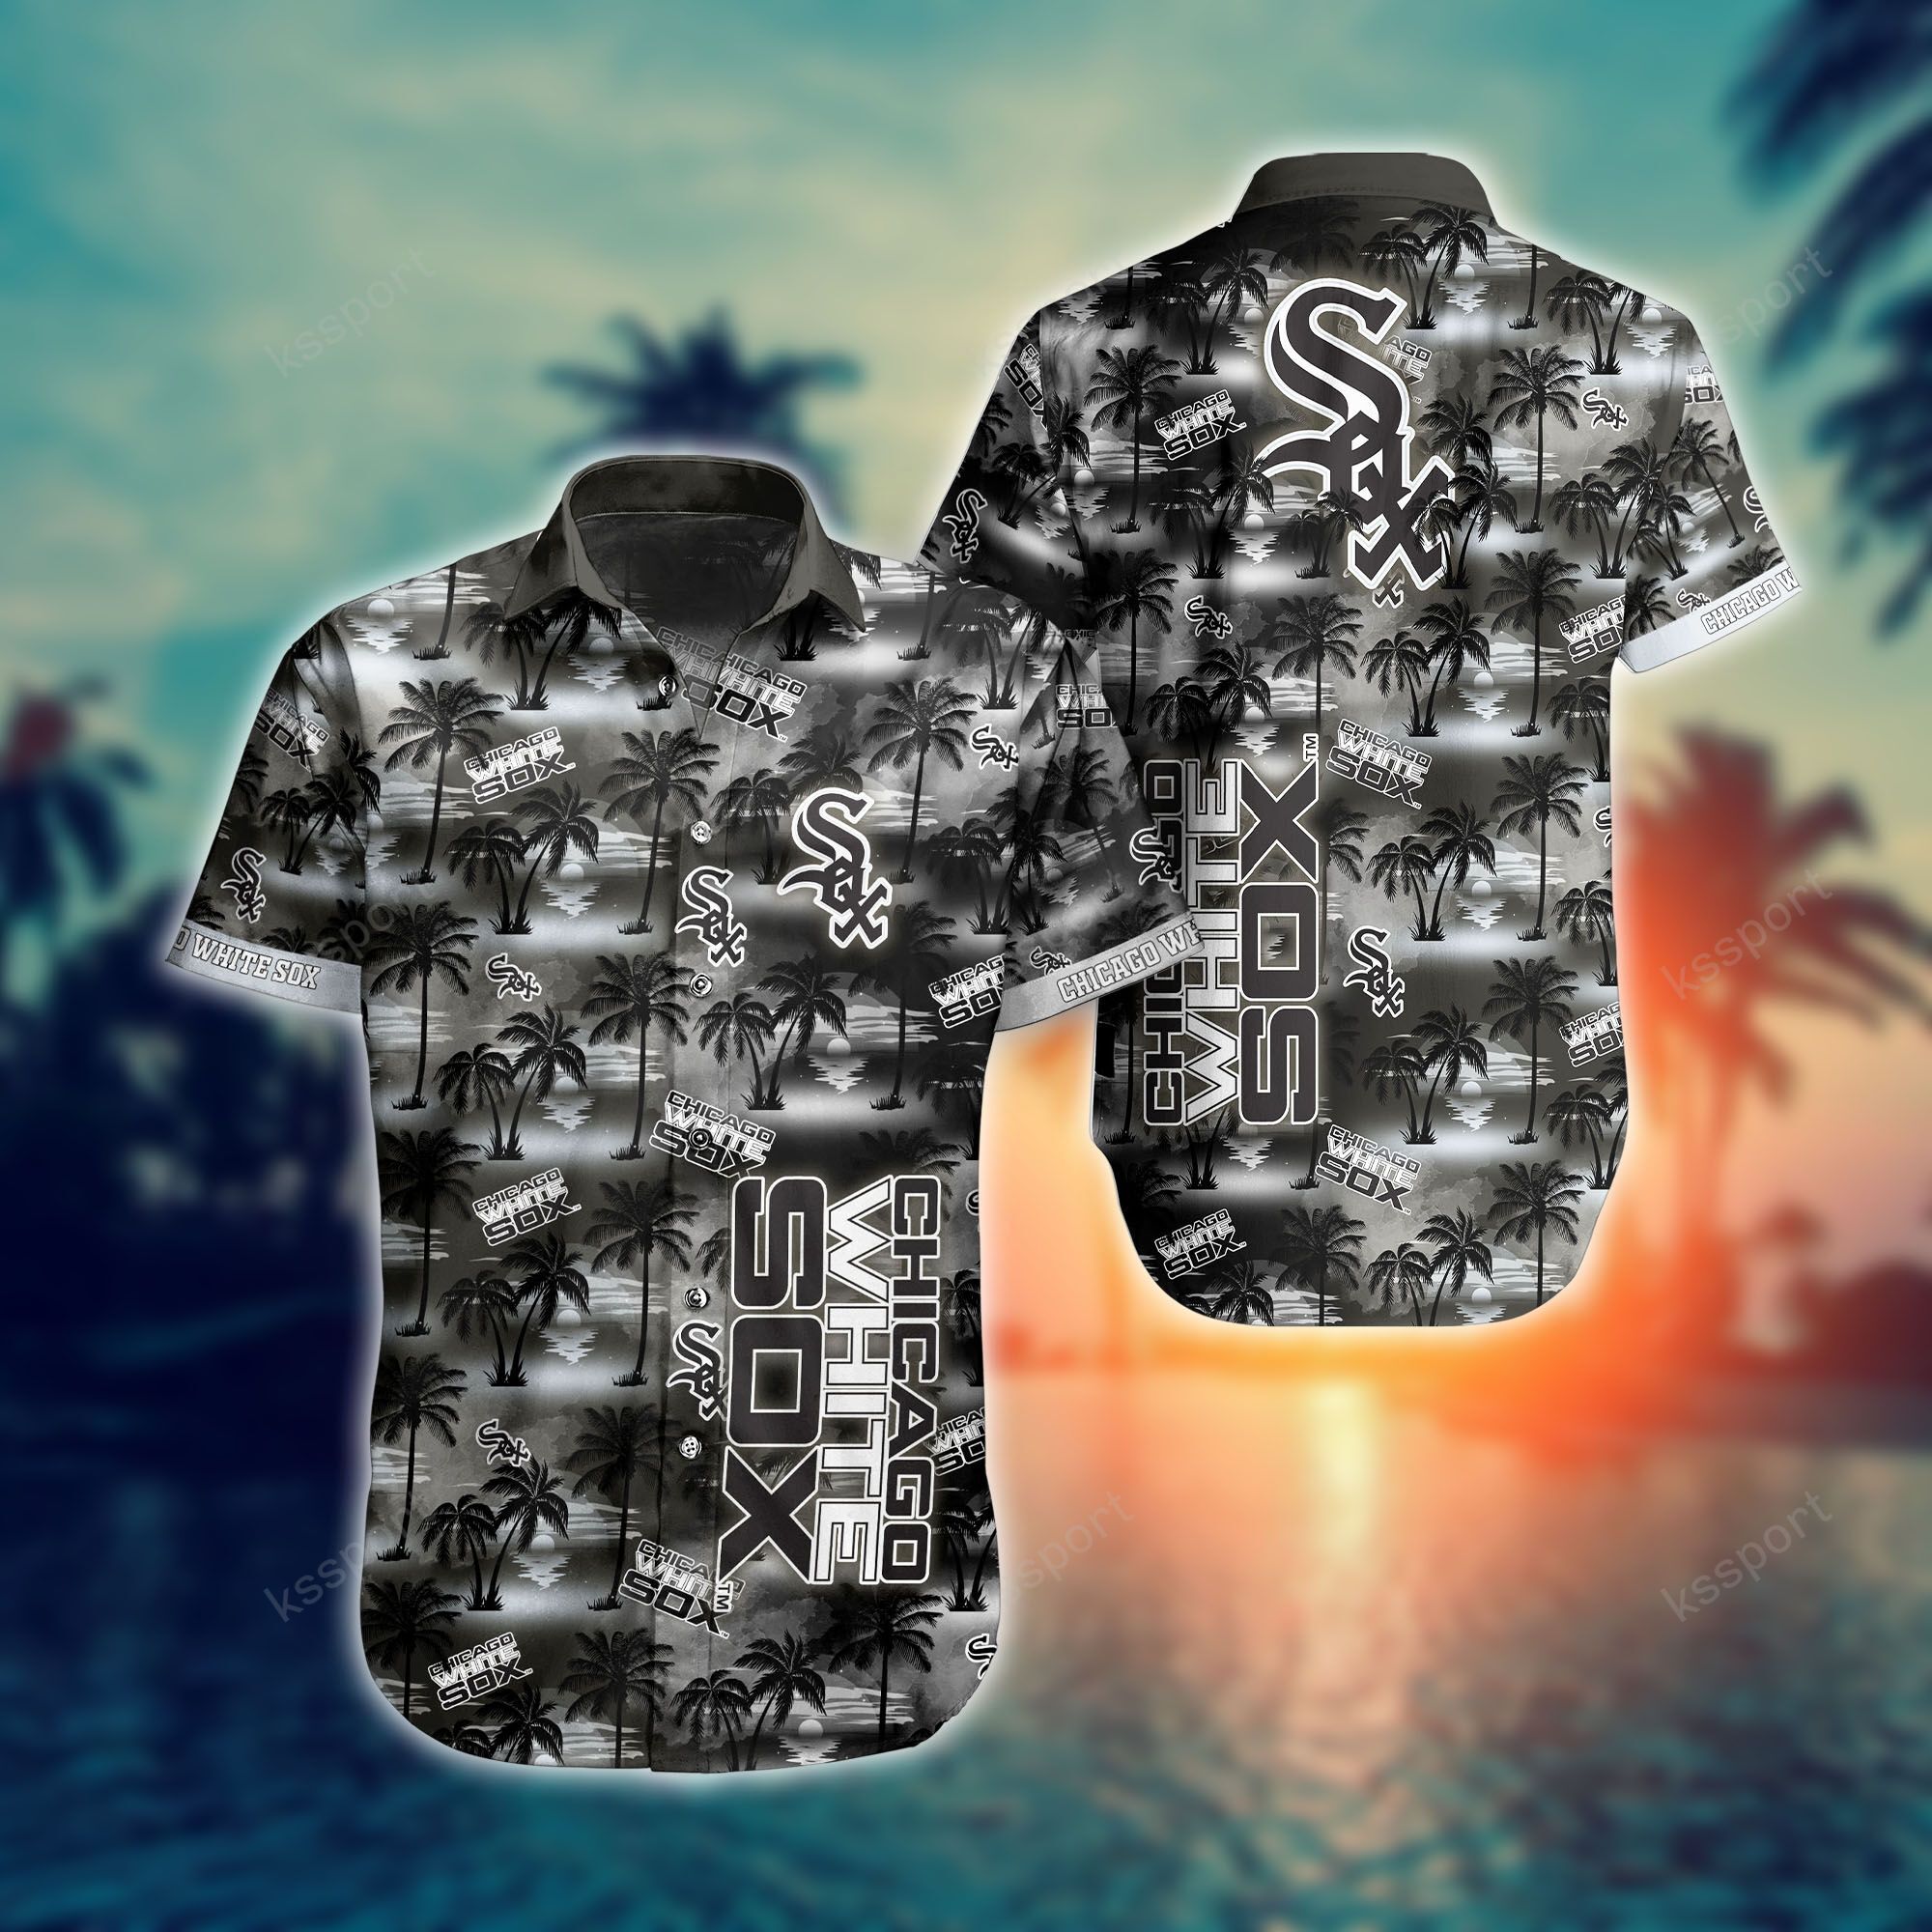 Treat yourself to a cool Hawaiian set today! 109